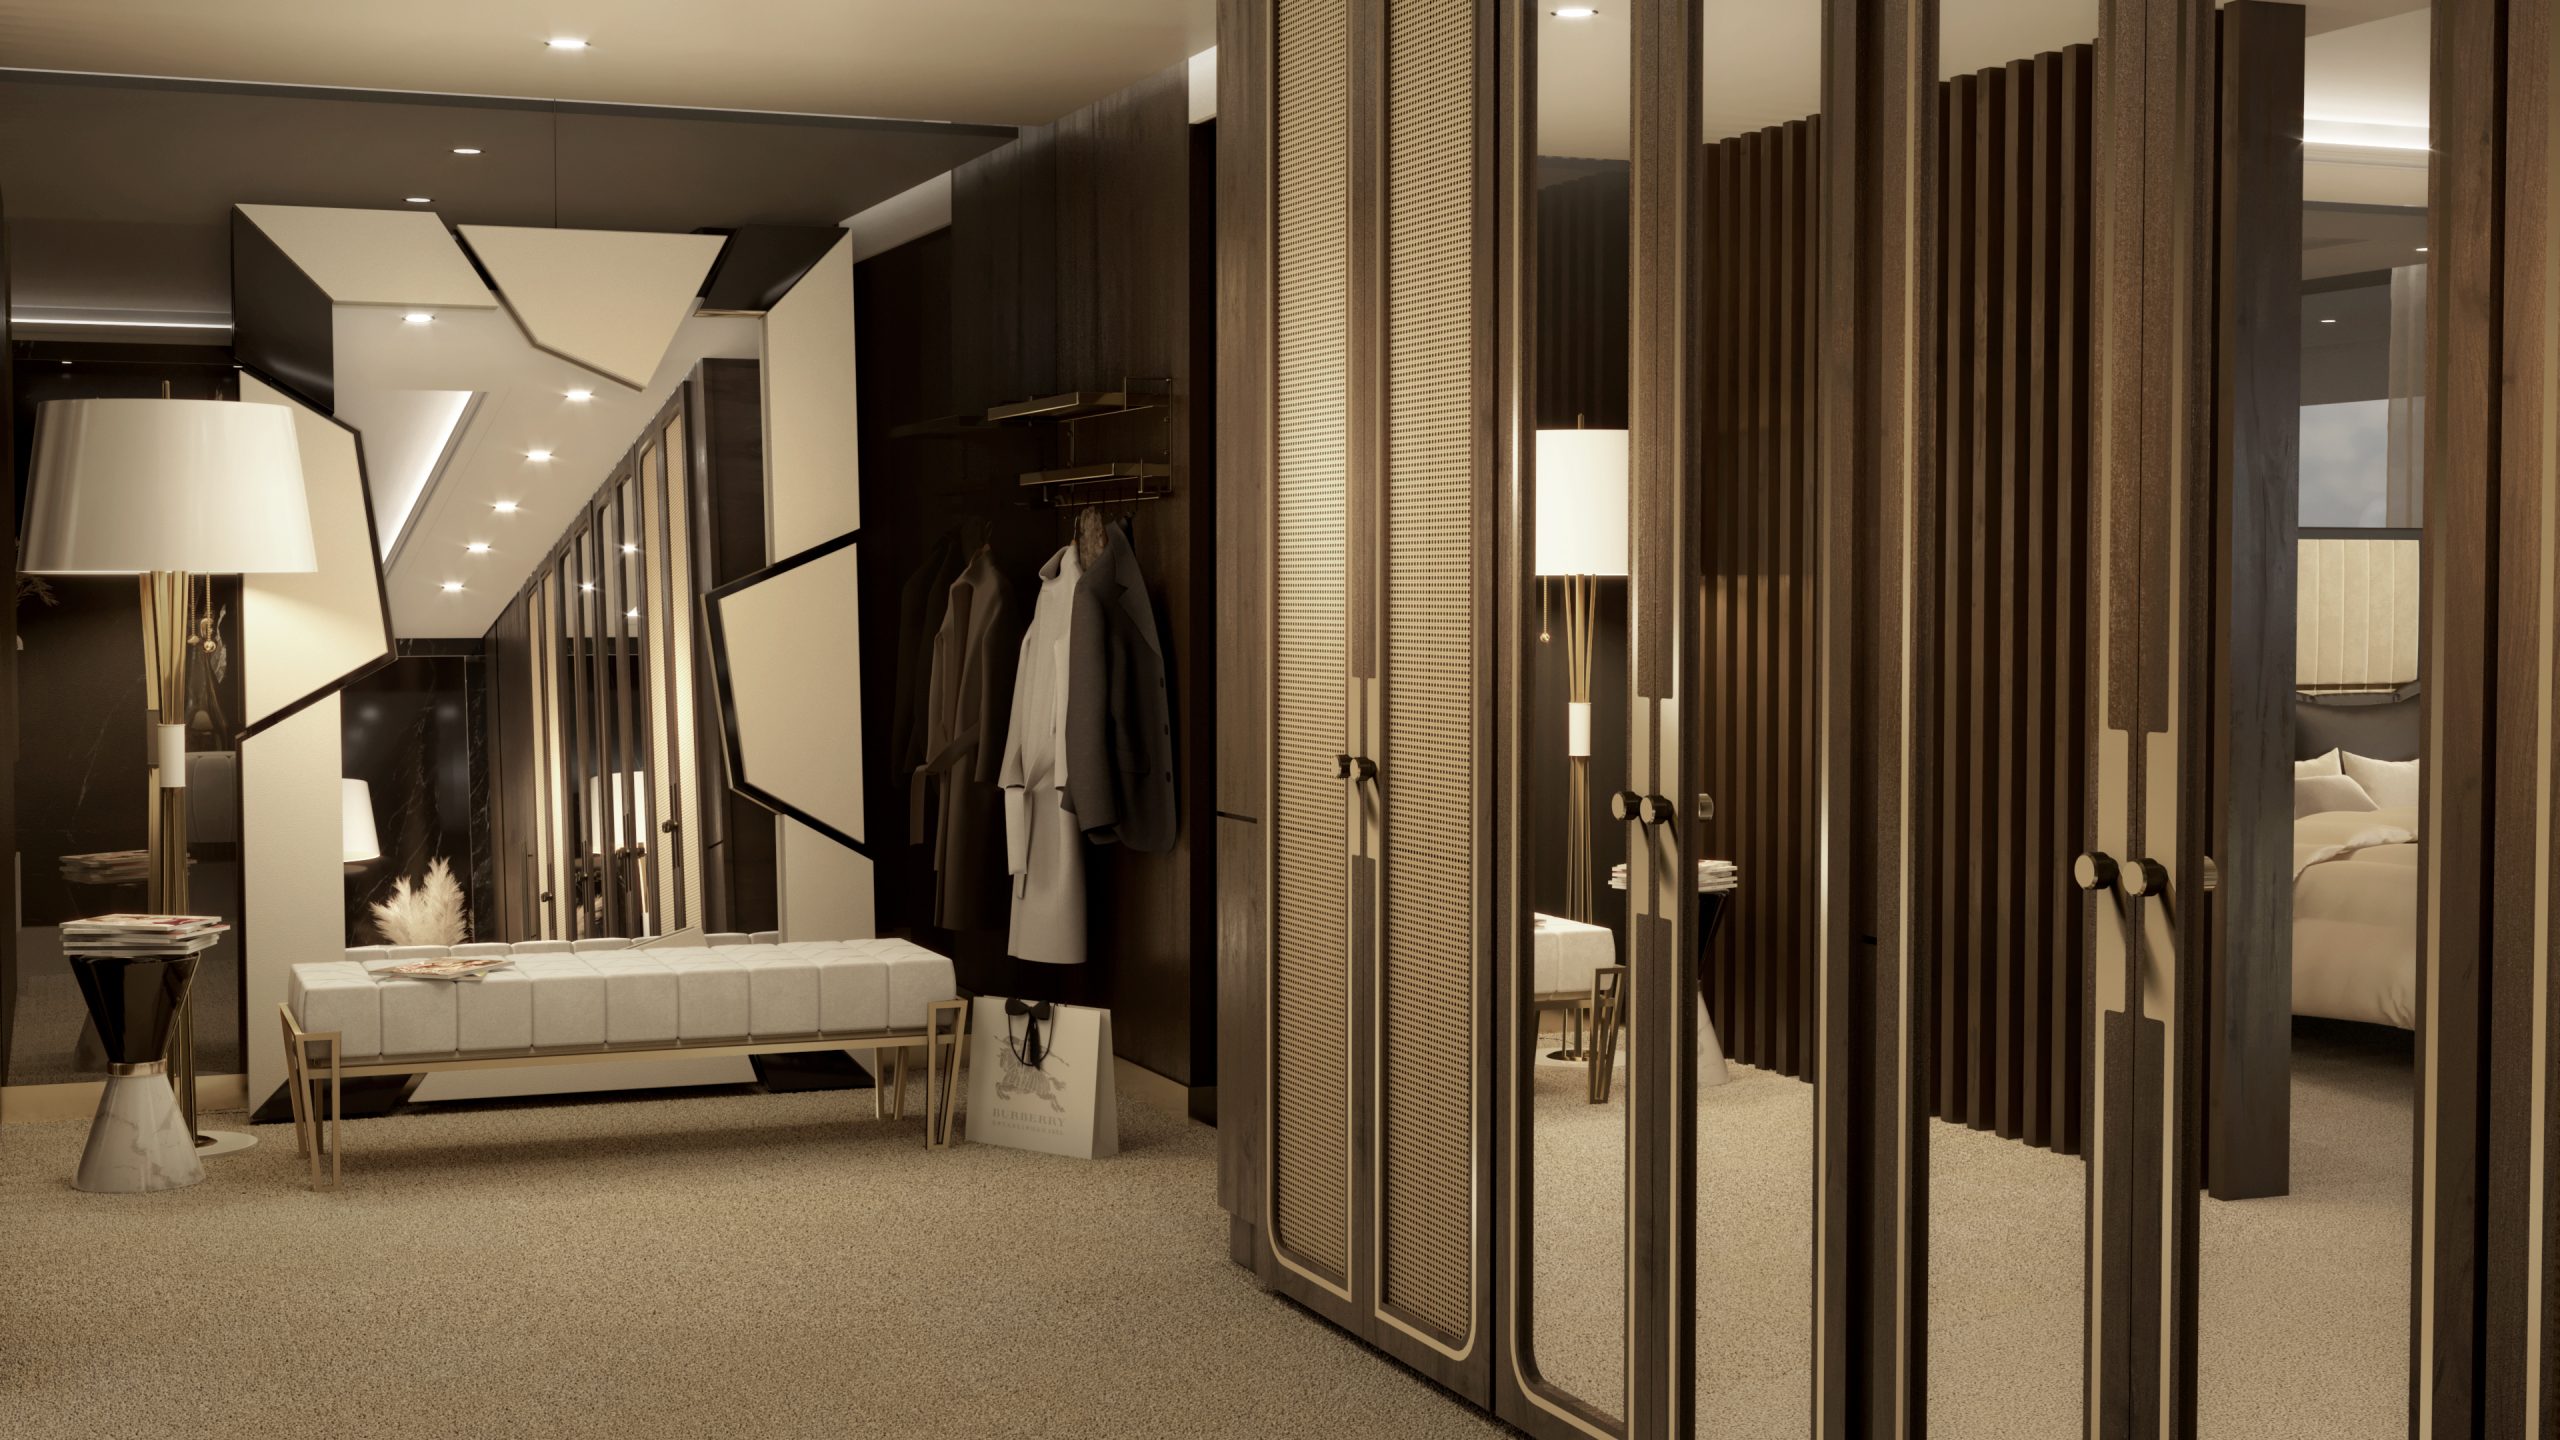 THE CLOSET AREA OF YOUR DREAMS